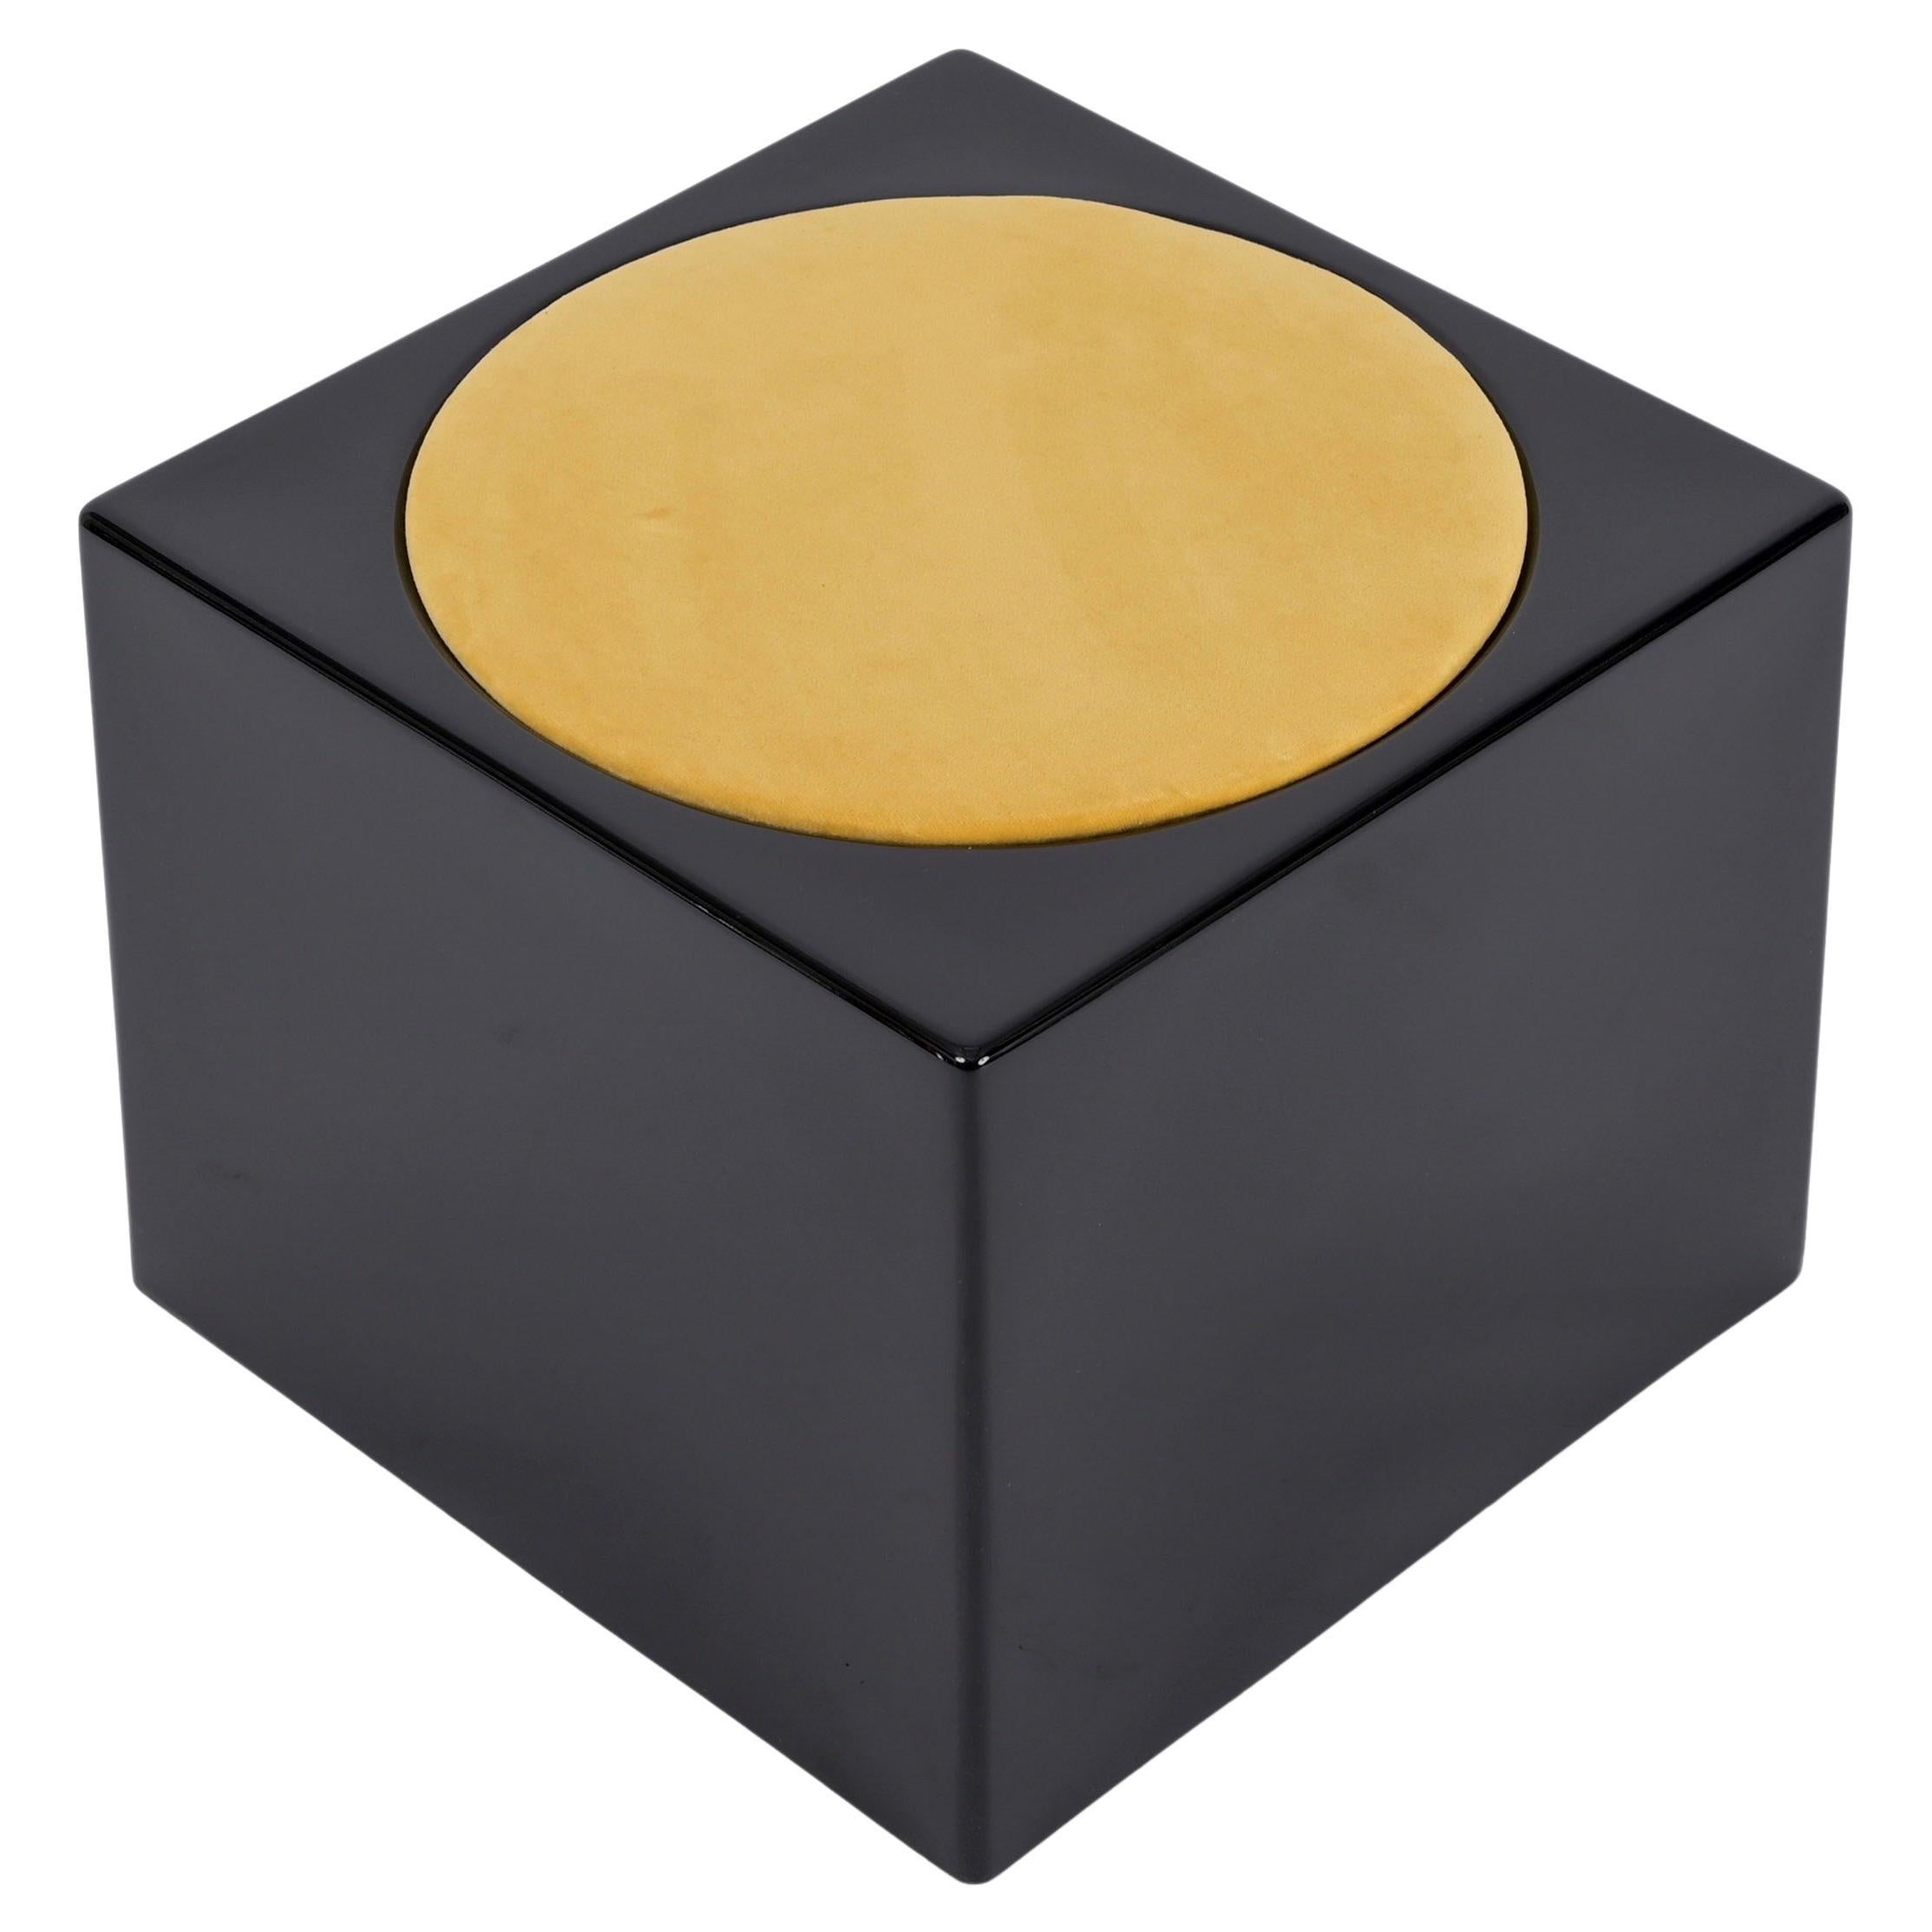 Mid-Century 'Il Kubile' Cubic Stool, by Pellegrini for MIM Roma, Italy, 1970s